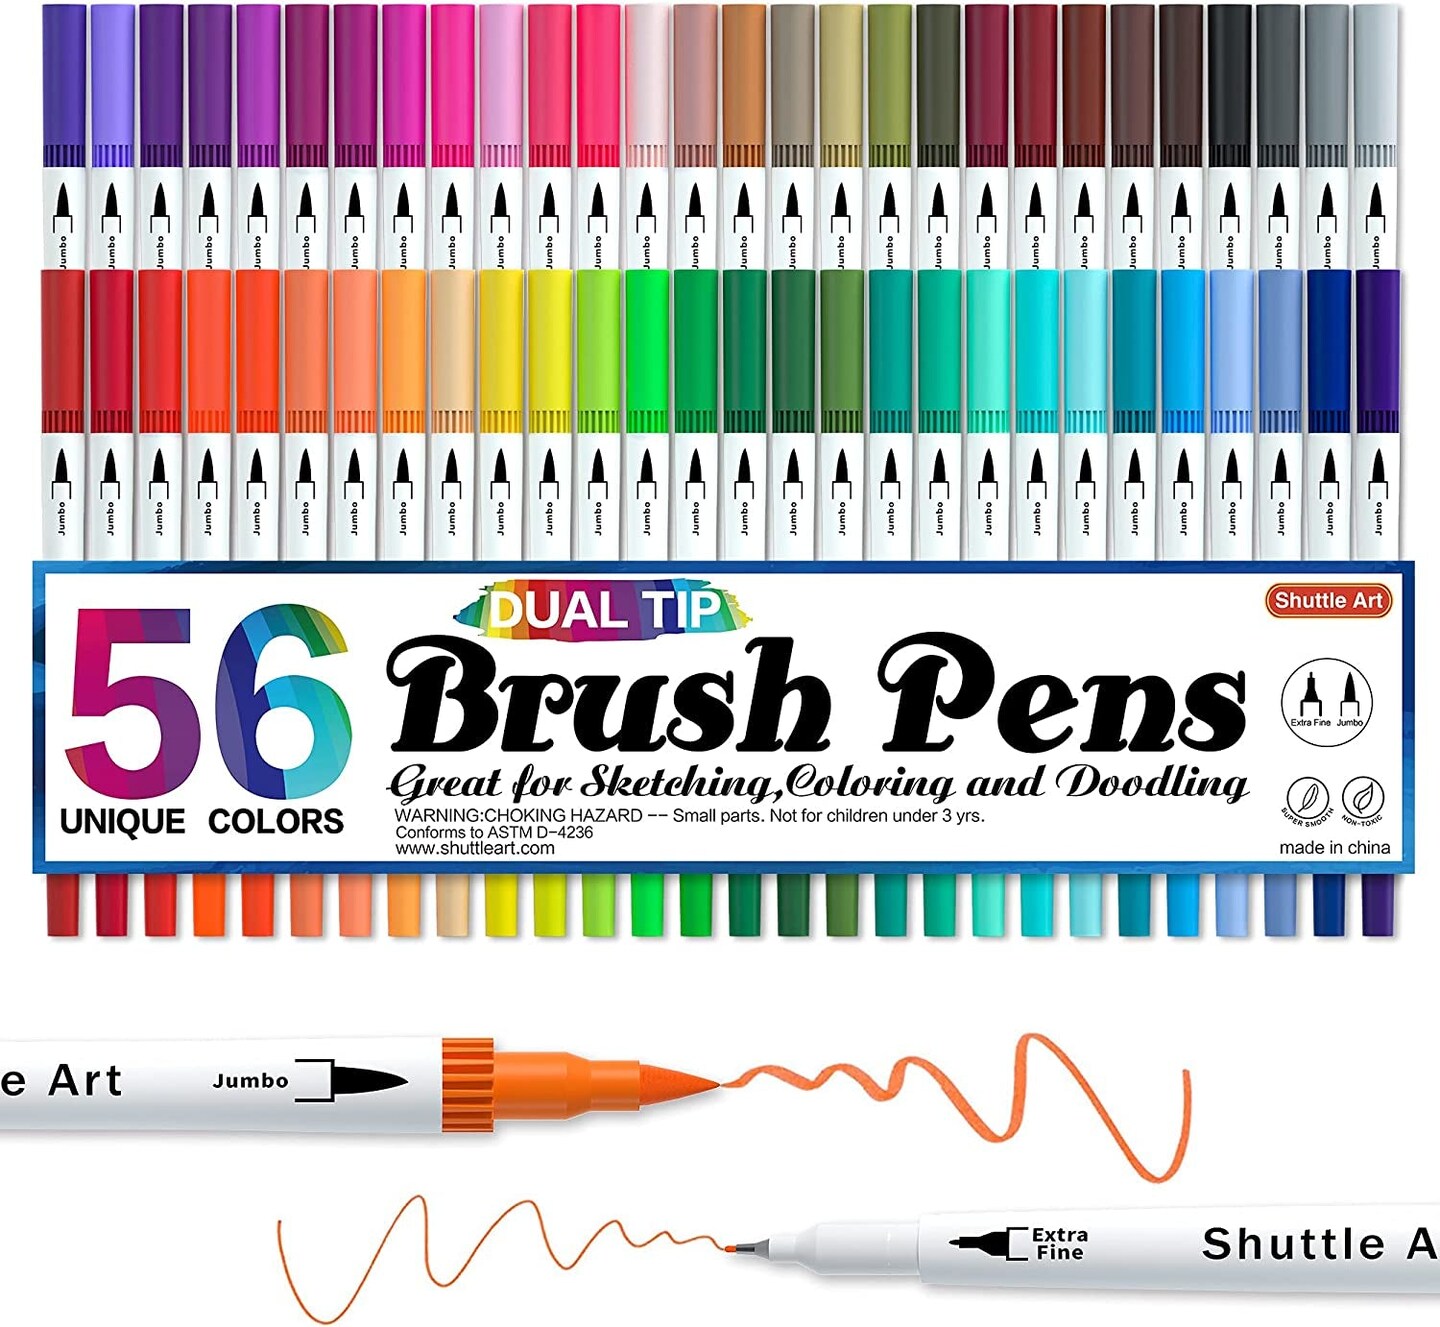 120 Colors [Dual] [Tip] Fineliner [Brush] Art [Marker] Pens Set with 1  Coloring Book, Perfect for Kids Adult Artist Calligraphy Hand Lettering  Journal Doodling Writing.